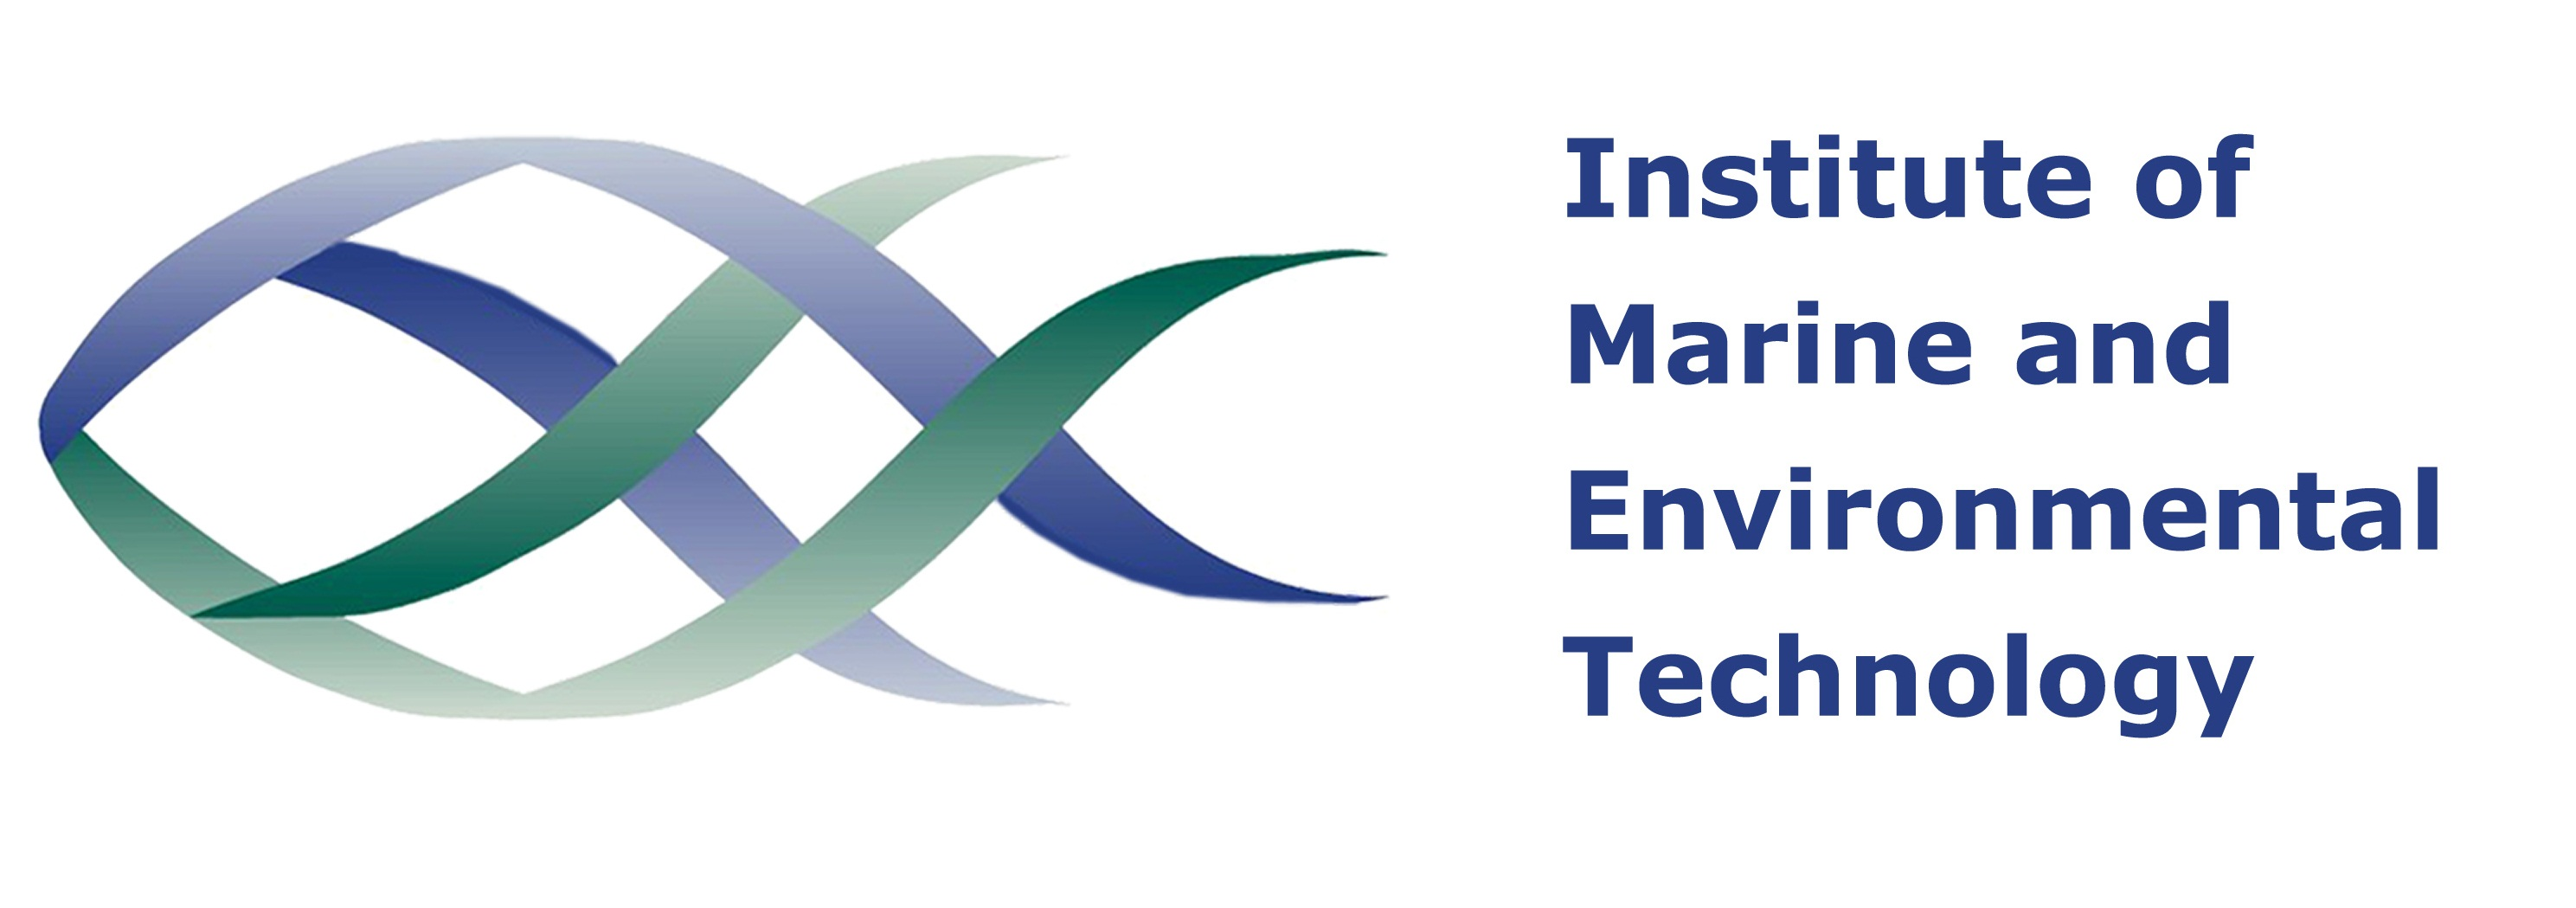 Institute of Marine and Environmental Technology logo